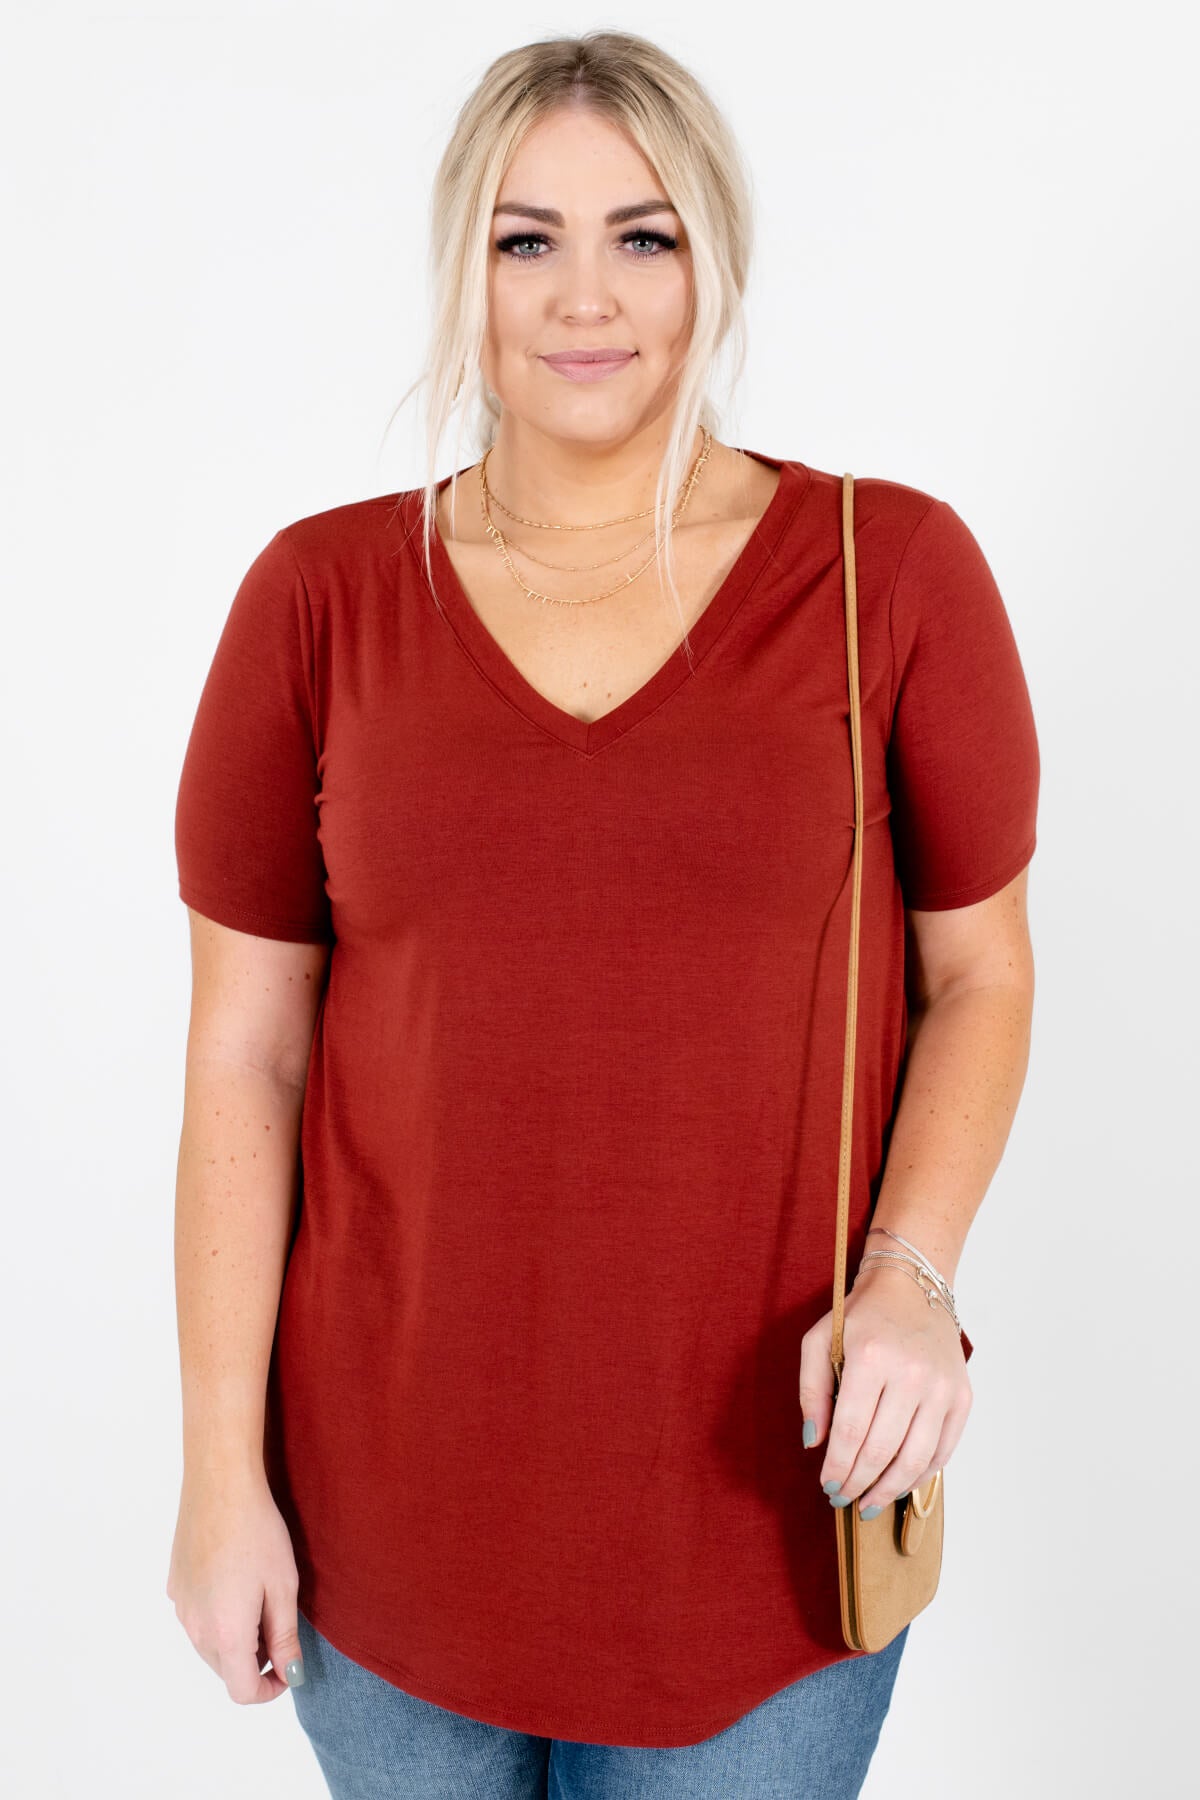 Women’s Rust Orange Oversized Relaxed Fit Boutique Top